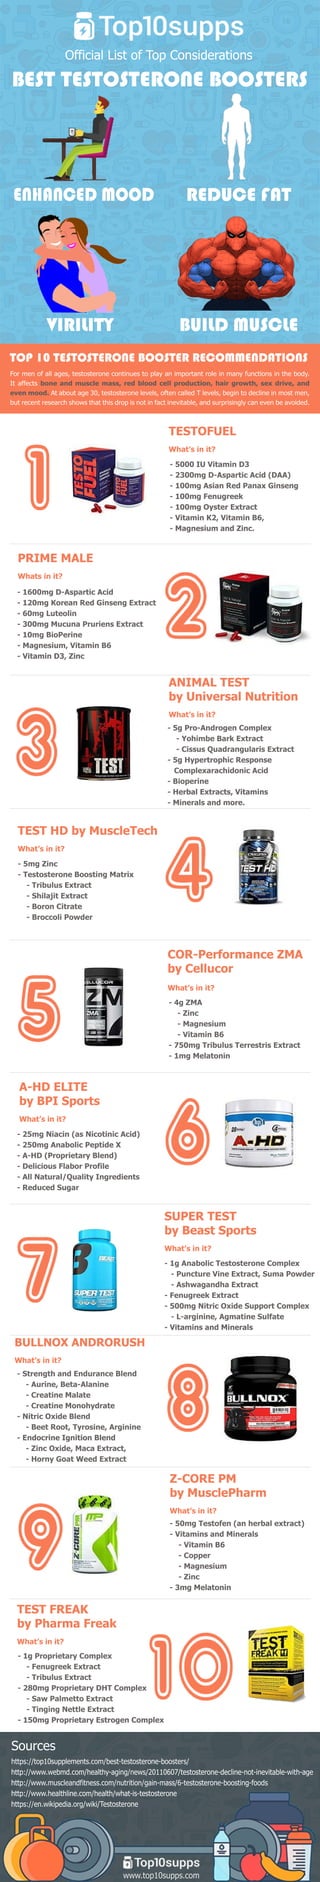 www.top10supps.com
https://top10supplements.com/best-testosterone-boosters/
http://www.webmd.com/healthy-aging/news/20110607/testosterone-decline-not-inevitable-with-age
http://www.muscleandfitness.com/nutrition/gain-mass/6-testosterone-boosting-foods
http://www.healthline.com/health/what-is-testosterone
https://en.wikipedia.org/wiki/Testosterone
Sources
Formenofallages,testosteronecontinuestoplayanimportantroleinmanyfunctionsinthebody.
Itaffectsboneandmusclemass,redbloodcellproduction,hairgrowth,sexdrive,and
evenmood.Ataboutage30,testosteronelevels,oftencalledTlevels,begintodeclineinmostmen,
butrecentresearchshowsthatthisdropisnotinfactinevitable,andsurprisinglycanevenbeavoided.
TOP10TESTOSTERONEBOOSTERRECOMMENDATIONS
-1gProprietaryComplex
-FenugreekExtract
-TribulusExtract
-280mgProprietaryDHTComplex
-Saw PalmettoExtract
-TingingNettleExtract
-150mgProprietaryEstrogenComplex-150mgProprietaryEstrogenComplex
TESTFREAK
byPharmaFreak
What’sinit?
-50mgTestofen(anherbalextract)
-VitaminsandMinerals
-VitaminB6
-Copper
-Magnesium
-Zinc
-3mgMelatonin-3mgMelatonin
Z-COREPM
byMusclePharm
What’sinit?
-StrengthandEnduranceBlend
-Aurine,Beta-Alanine
-CreatineMalate
-CreatineMonohydrate
-NitricOxideBlend
-BeetRoot,Tyrosine,Arginine
-EndocrineIgnitionBlend-EndocrineIgnitionBlend
-ZincOxide,MacaExtract,
-HornyGoatWeedExtract
BULLNOXANDRORUSH
What’sinit?
-1gAnabolicTestosteroneComplex
-PunctureVineExtract,SumaPowder
-AshwagandhaExtract
-FenugreekExtract
-500mgNitricOxideSupportComplex
-L-arginine,AgmatineSulfate
-VitaminsandMinerals-VitaminsandMinerals
SUPERTEST
byBeastSports
What’sinit?
-25mgNiacin(asNicotinicAcid)
-250mgAnabolicPeptideX
-A-HD(ProprietaryBlend)
-DeliciousFlaborProfile
-AllNatural/QualityIngredients
-ReducedSugar
A-HDELITE
byBPISports
What’sinit?
-4gZMA
-Zinc
-Magnesium
-VitaminB6
-750mgTribulusTerrestrisExtract
-1mgMelatonin
COR-PerformanceZMA
byCellucor
What’sinit?
-5mgZinc
-TestosteroneBoostingMatrix
-TribulusExtract
-ShilajitExtract
-BoronCitrate
-BroccoliPowder
TESTHDbyMuscleTech
What’sinit?
-5gPro-AndrogenComplex
-YohimbeBarkExtract
-CissusQuadrangularisExtract
-5gHypertrophicResponse
ComplexarachidonicAcid
-Bioperine
-HerbalExtracts,Vitamins-HerbalExtracts,Vitamins
-Mineralsandmore.
ANIMALTEST
byUniversalNutrition
What’sinit?
-1600mgD-AsparticAcid
-120mgKoreanRedGinsengExtract
-60mgLuteolin
-300mgMucunaPruriensExtract
-10mgBioPerine
-Magnesium,VitaminB6
-VitaminD3,Zinc-VitaminD3,Zinc
PRIMEMALE
Whatsinit?
-5000IUVitaminD3
-2300mgD-AsparticAcid(DAA)
-100mgAsianRedPanaxGinseng
-100mgFenugreek
-100mgOysterExtract
-VitaminK2,VitaminB6,
-Magnesium andZinc.-Magnesium andZinc.
TESTOFUEL
What’sinit?
BUILDMUSCLEVIRILITY
REDUCEFATENHANCEDMOOD
BESTTESTOSTERONEBOOSTERS
OfficialListofTopConsiderations
 